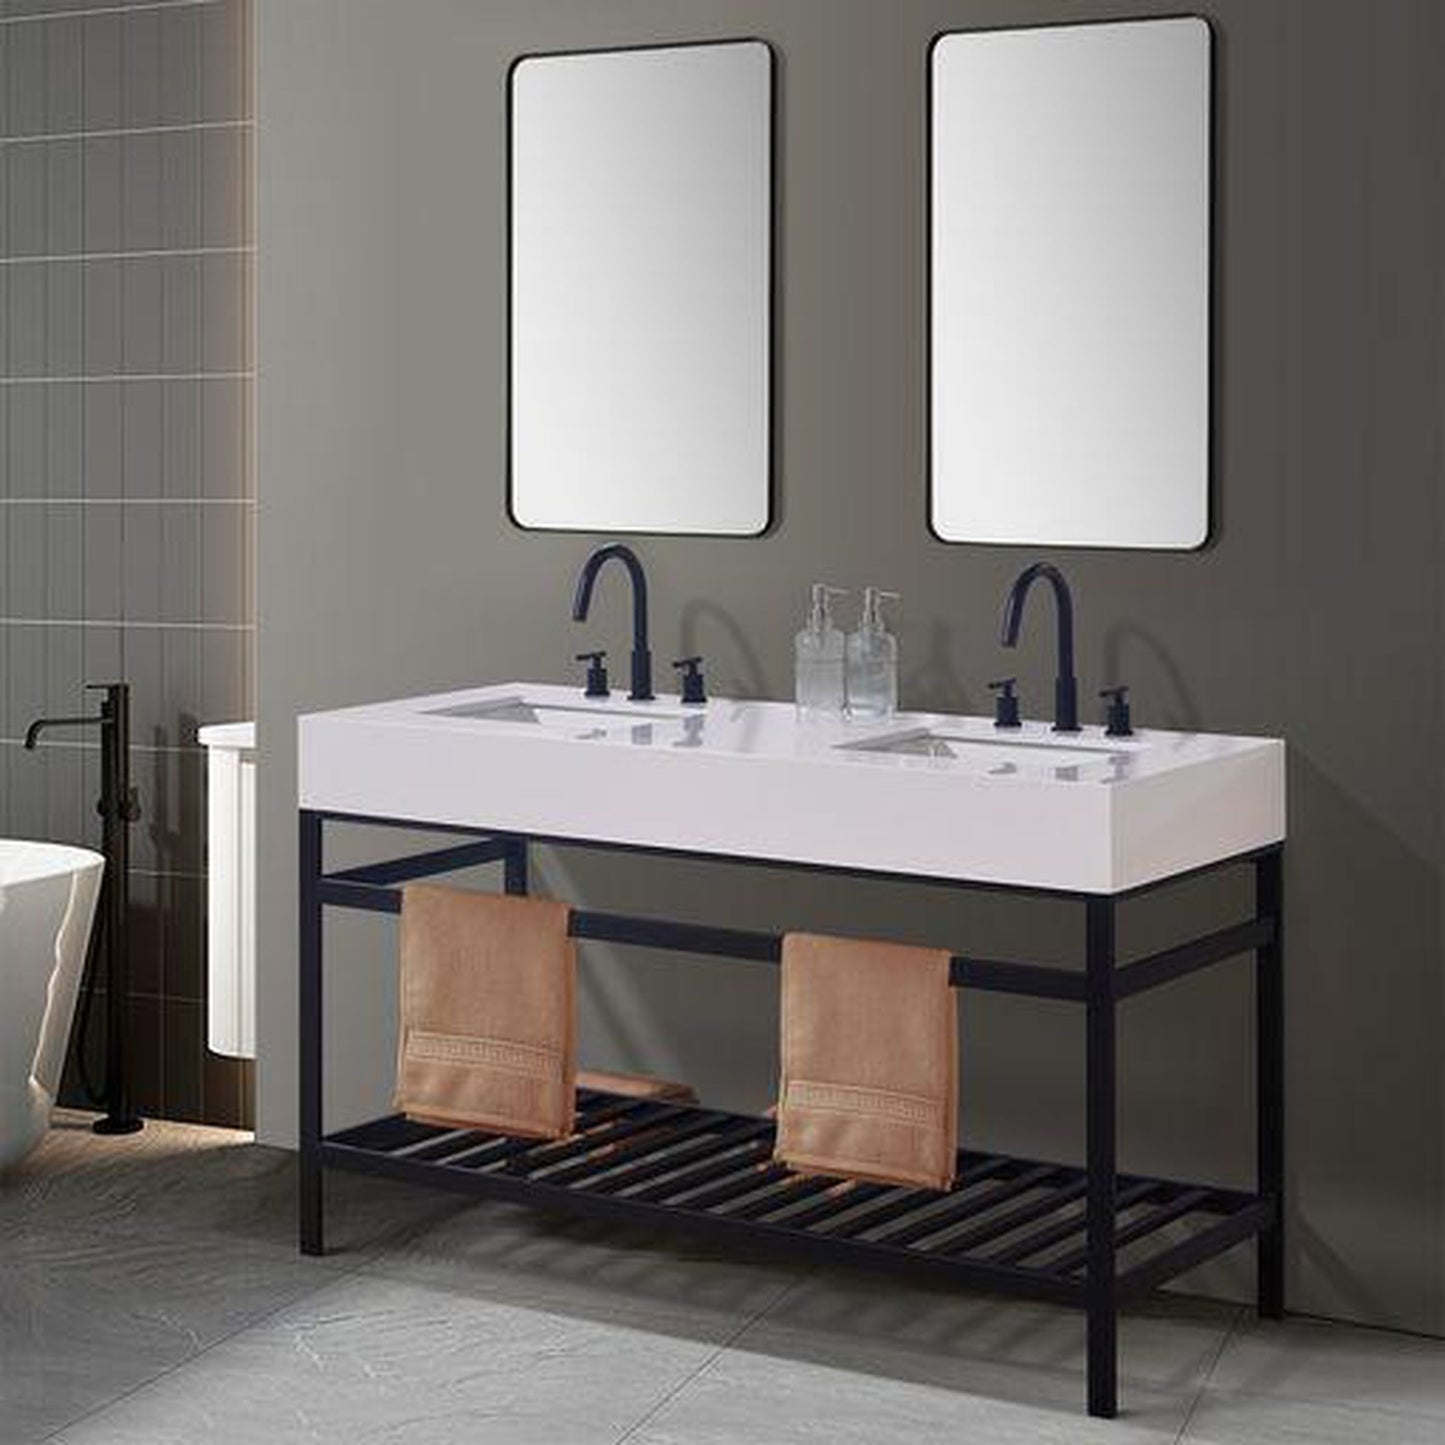 Altair Edolo 60" Matte Black Double Stainless Steel Bathroom Vanity Set Console With Mirror, Snow White Stone Top, Two Rectangular Undermount Ceramic Sinks, and Safety Overflow Hole